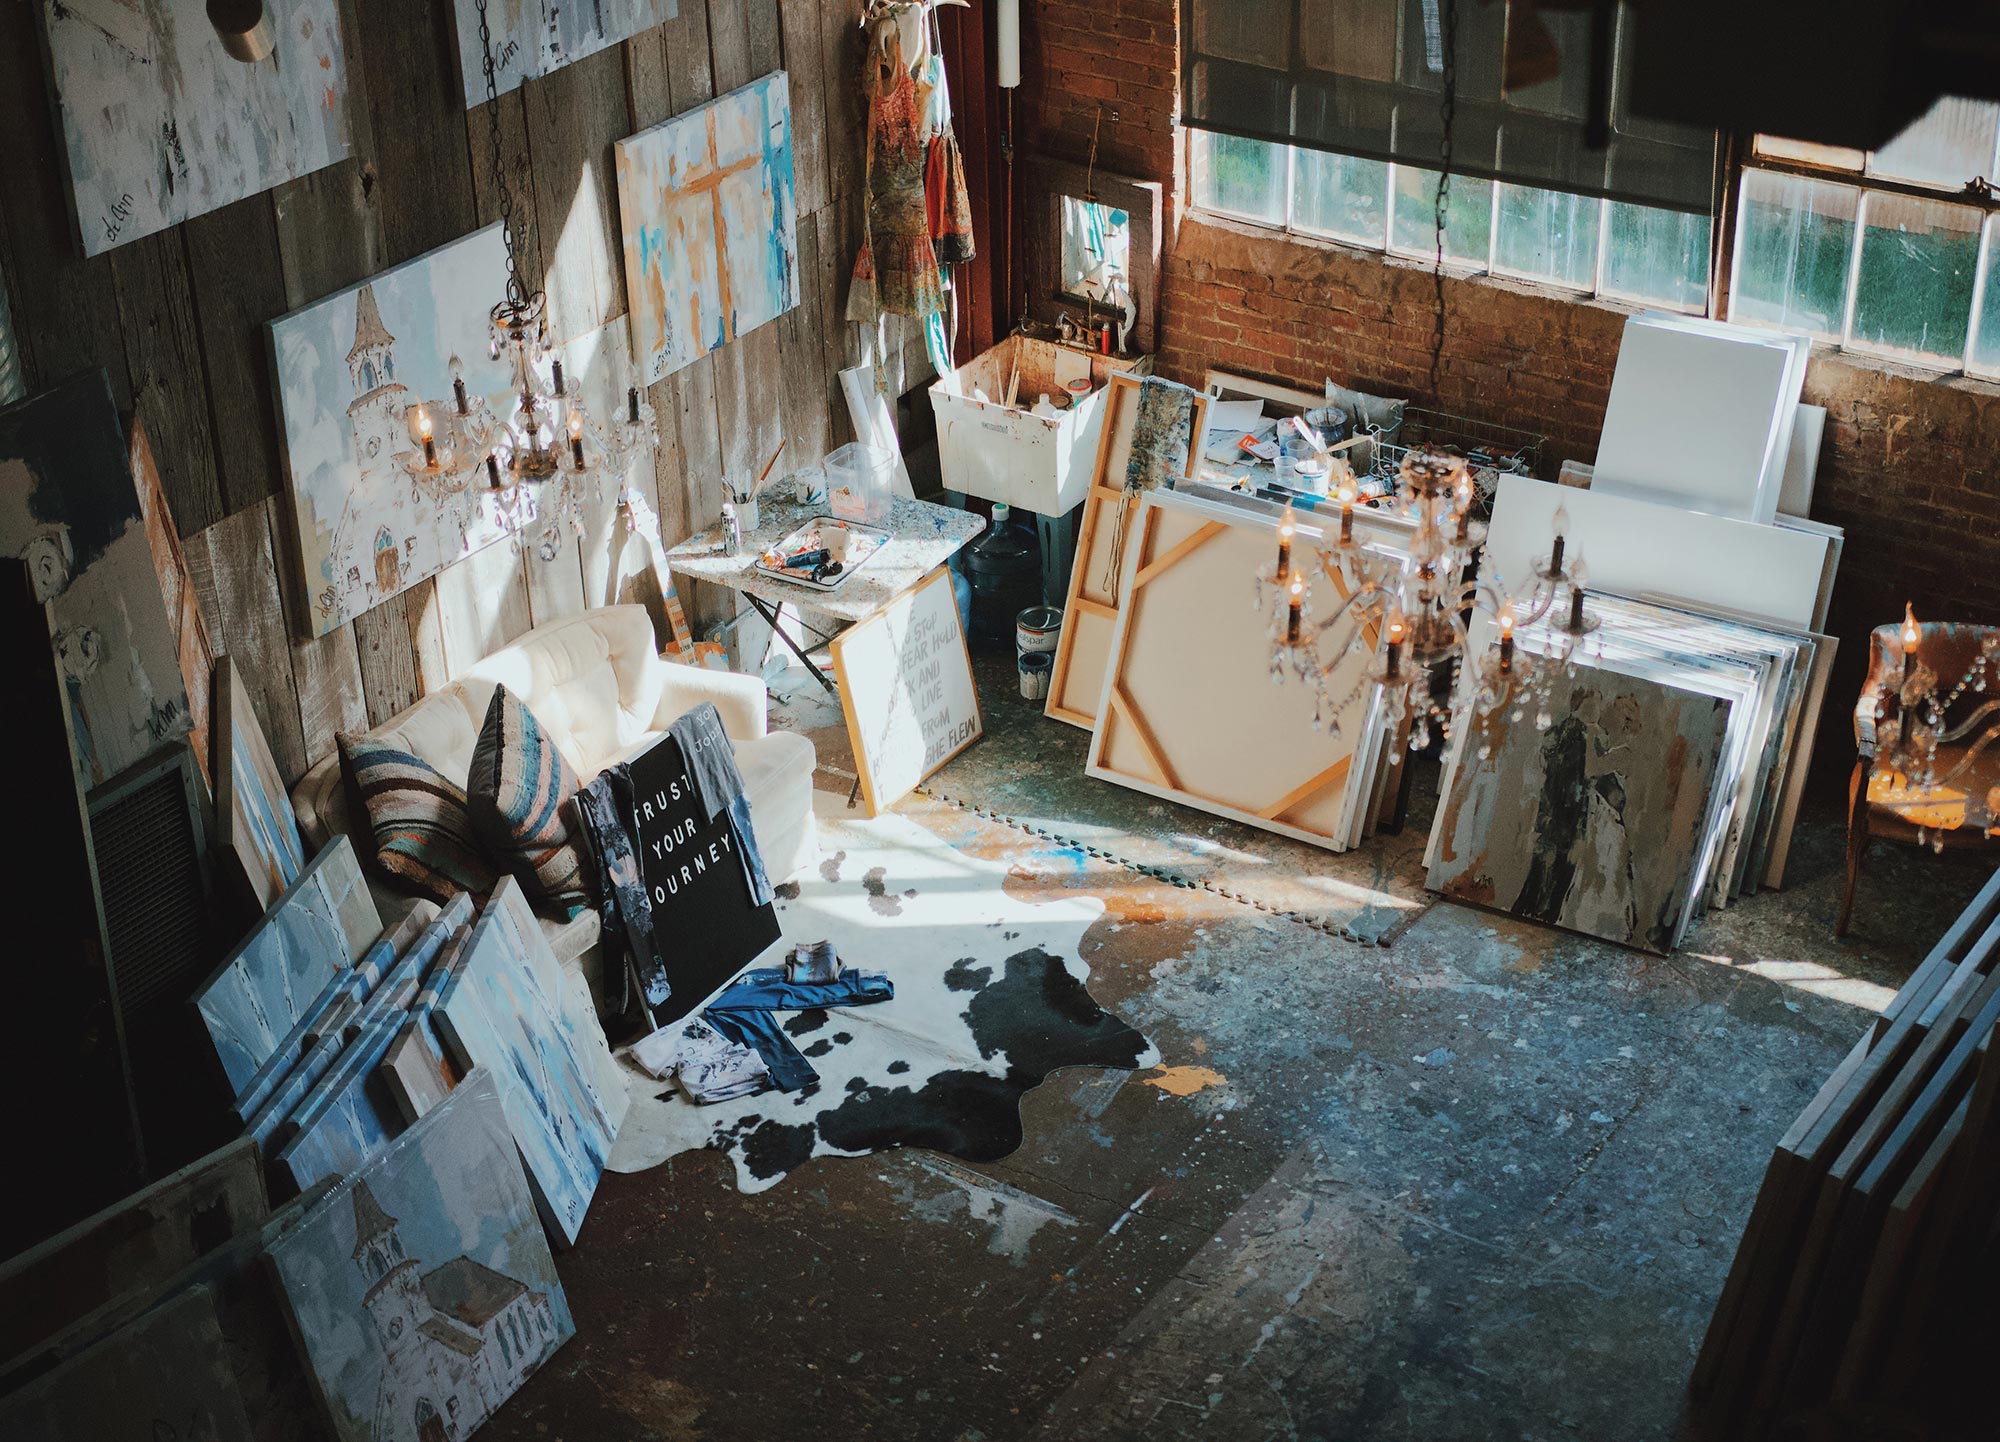 Canvases and paintings in a rustic art studio